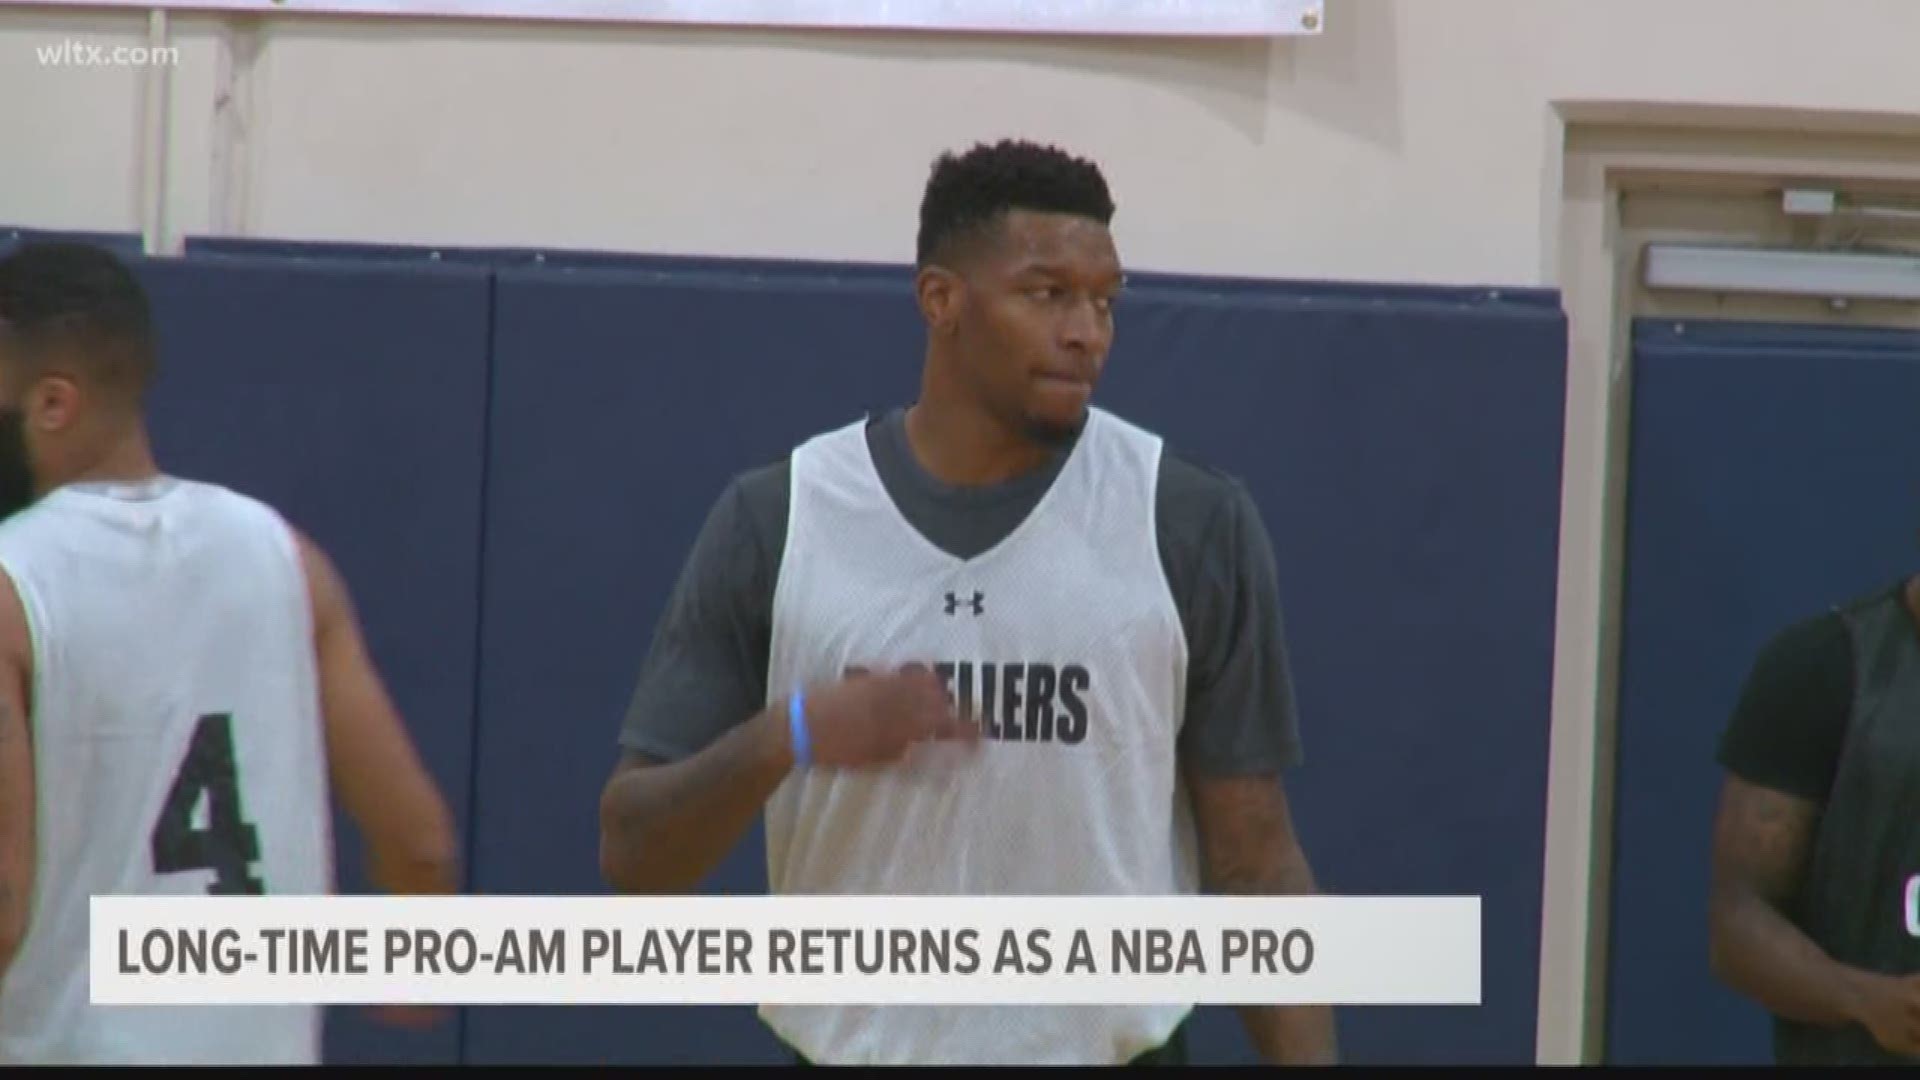 Great Falls native Torrey Craig participated in the first South Carolina Pro-Am. Now the event is in it's 7th year and Torrey is a NBA, His hard work has paid off.